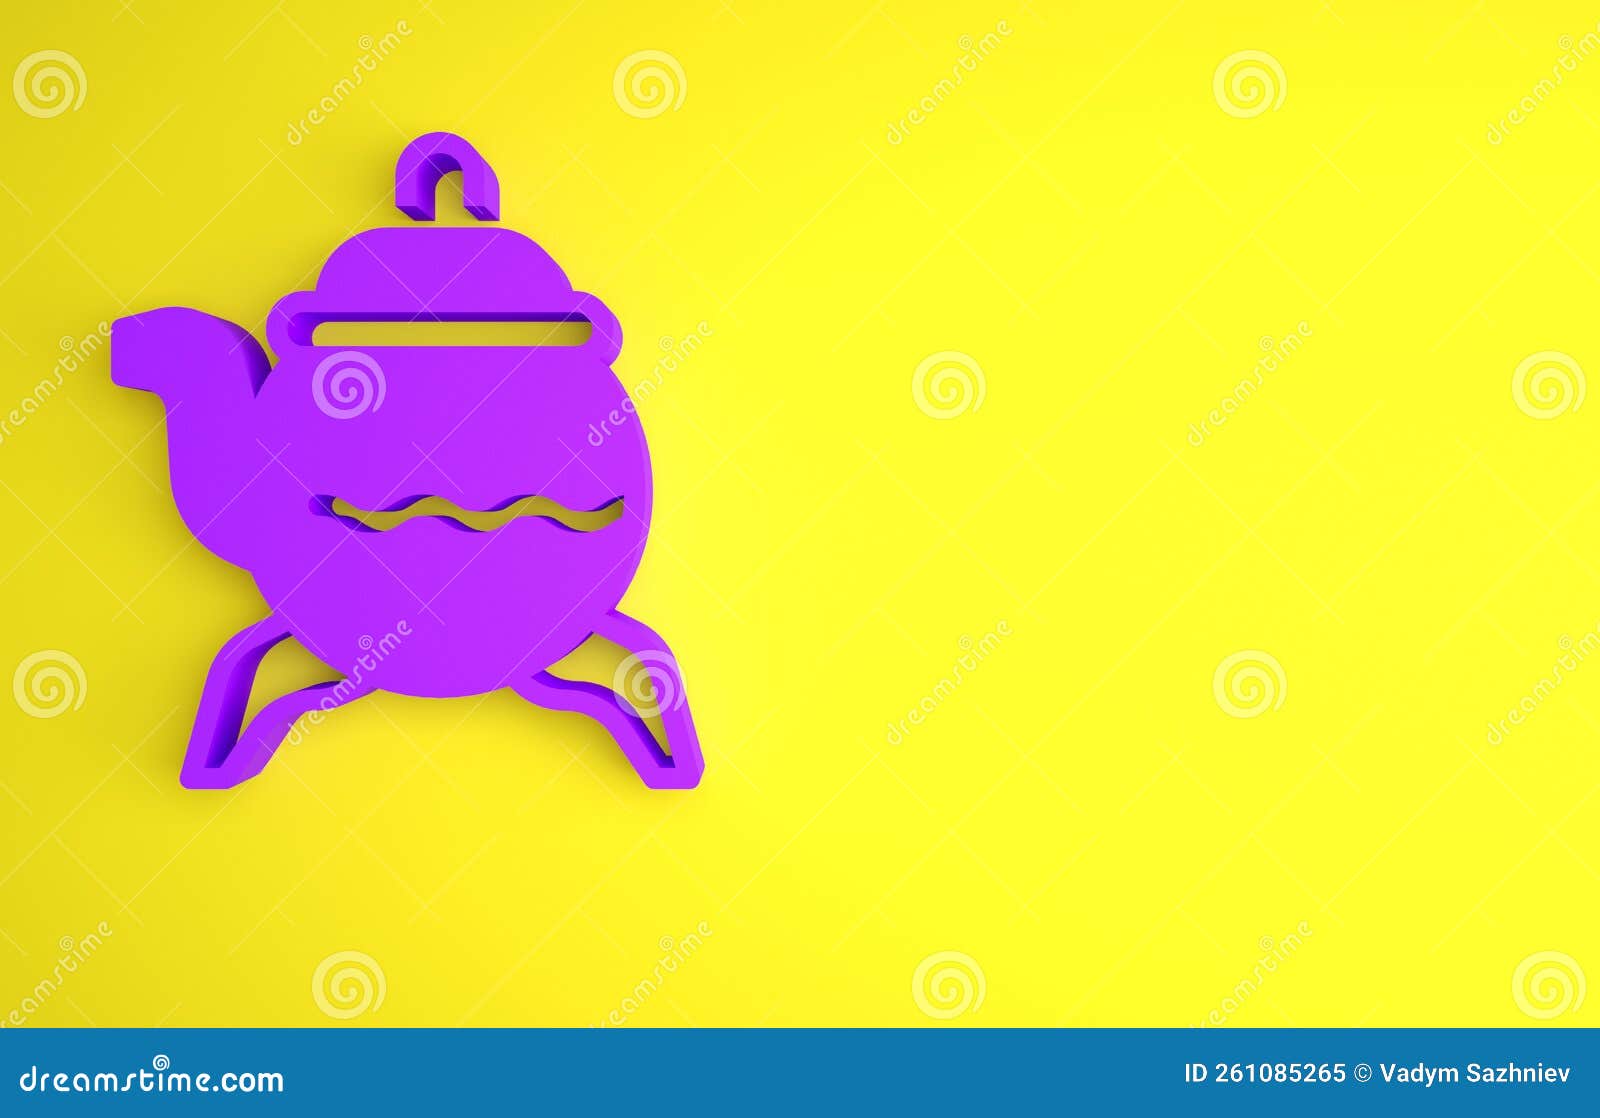 Purple Classic teapot icon isolated on yellow background. Minimalism concept. 3D render illustration.